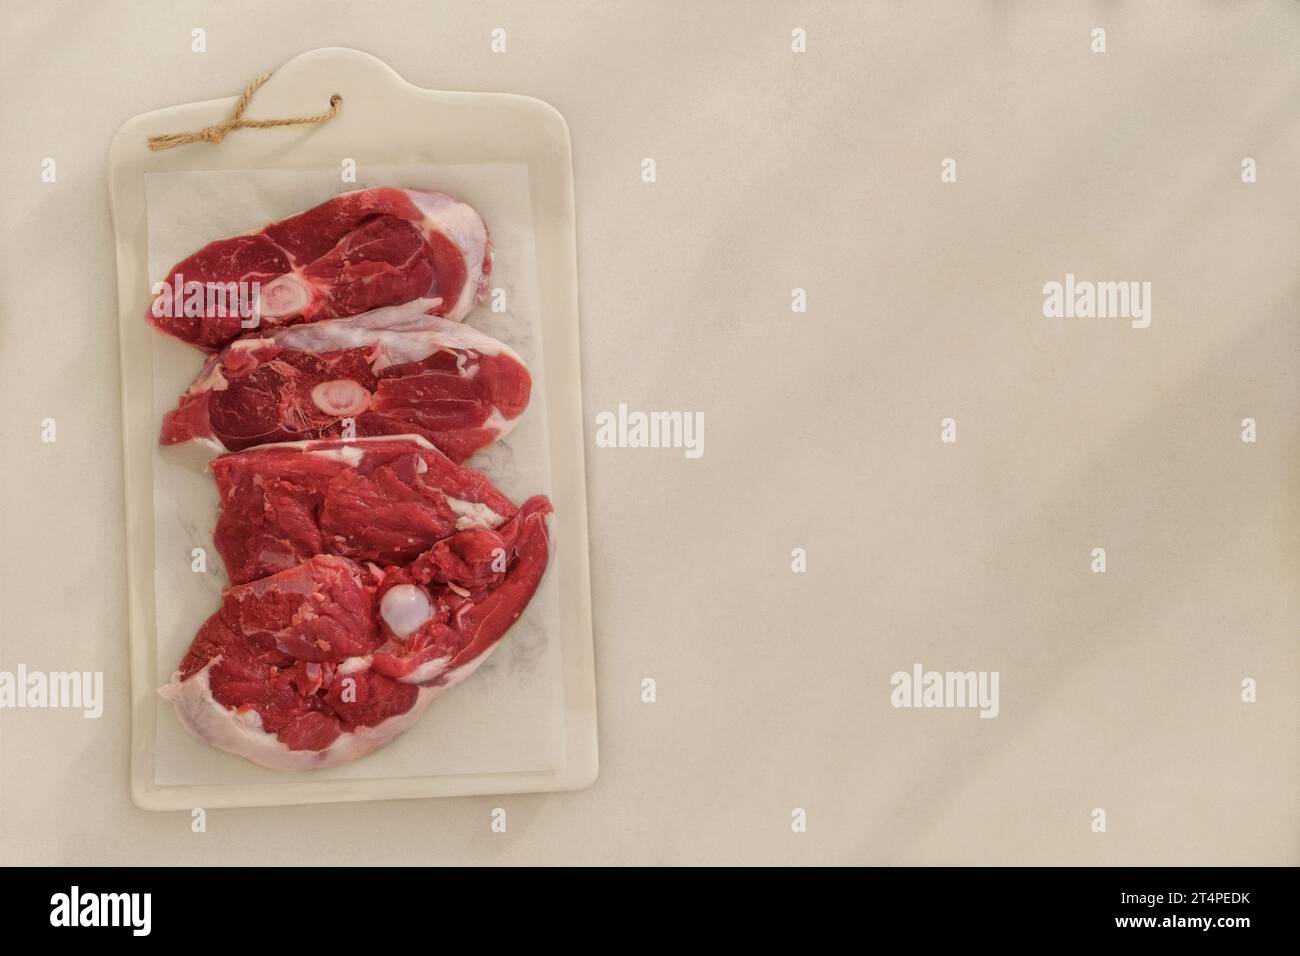 Lamb meat on a ceramic board on beige background. Pieces of meat for cooking. Rear part of the meat carcass. Top view. Stock Photo